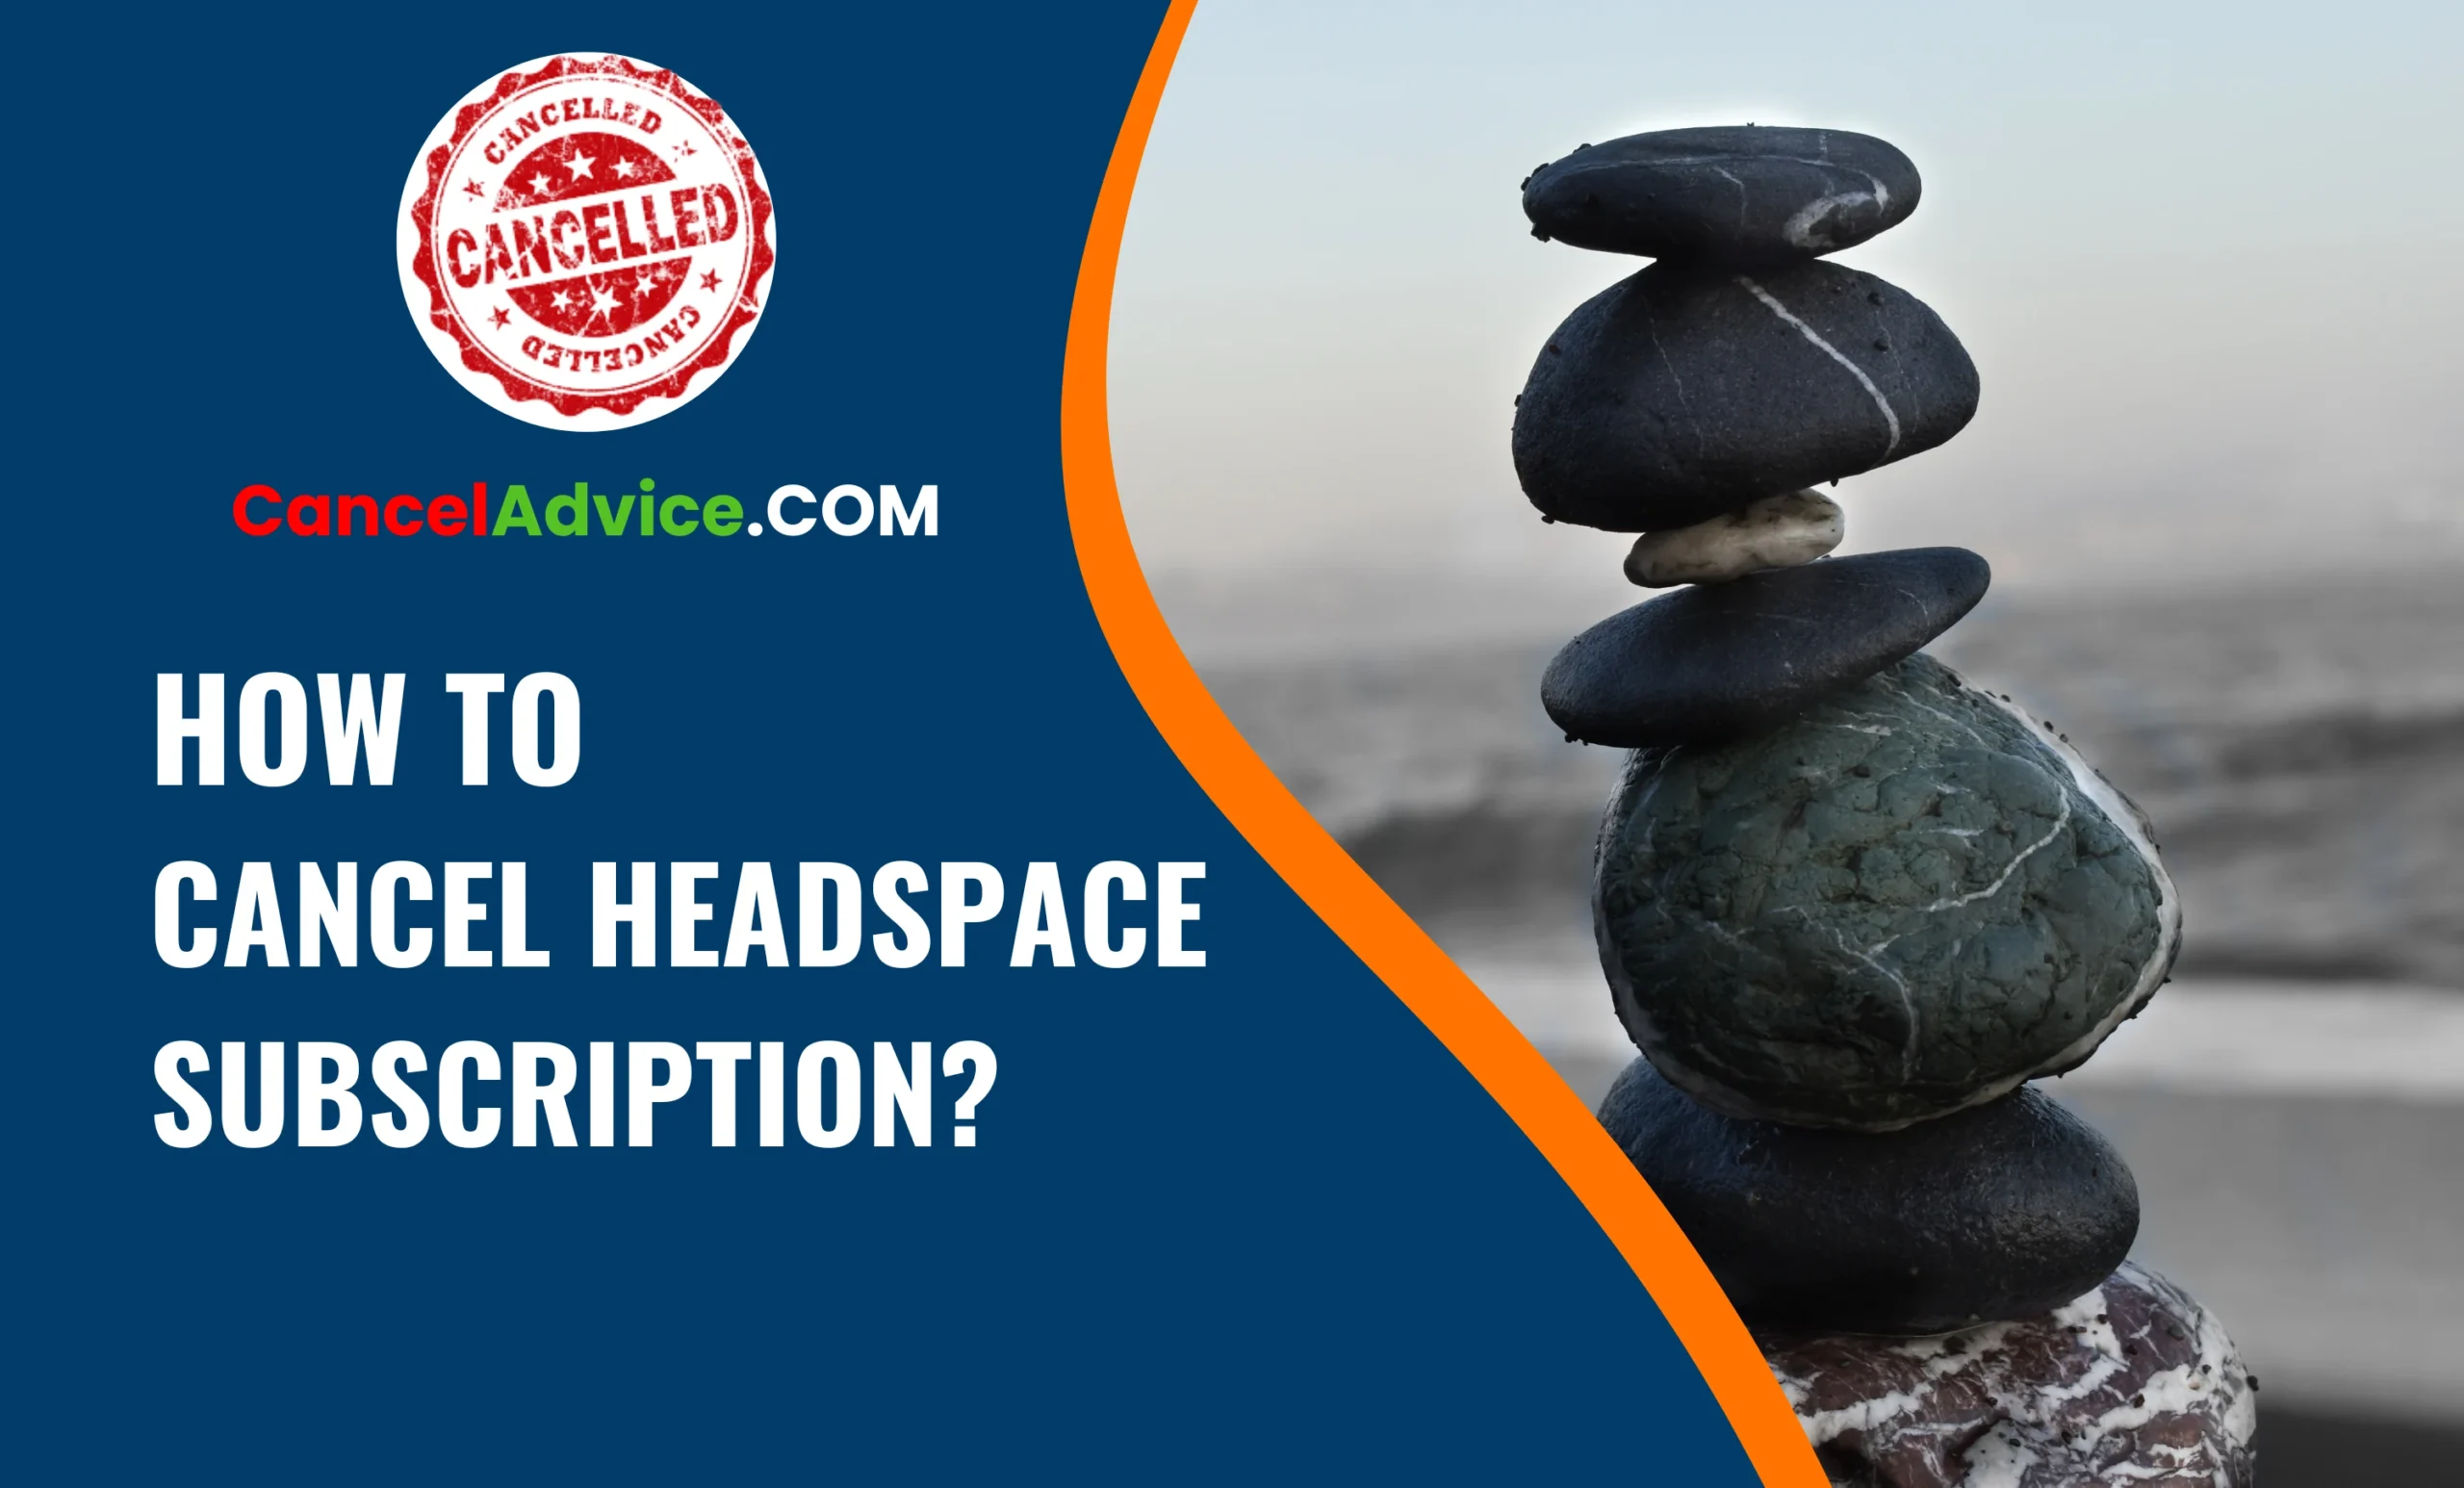 How To Cancel Headspace Subscription